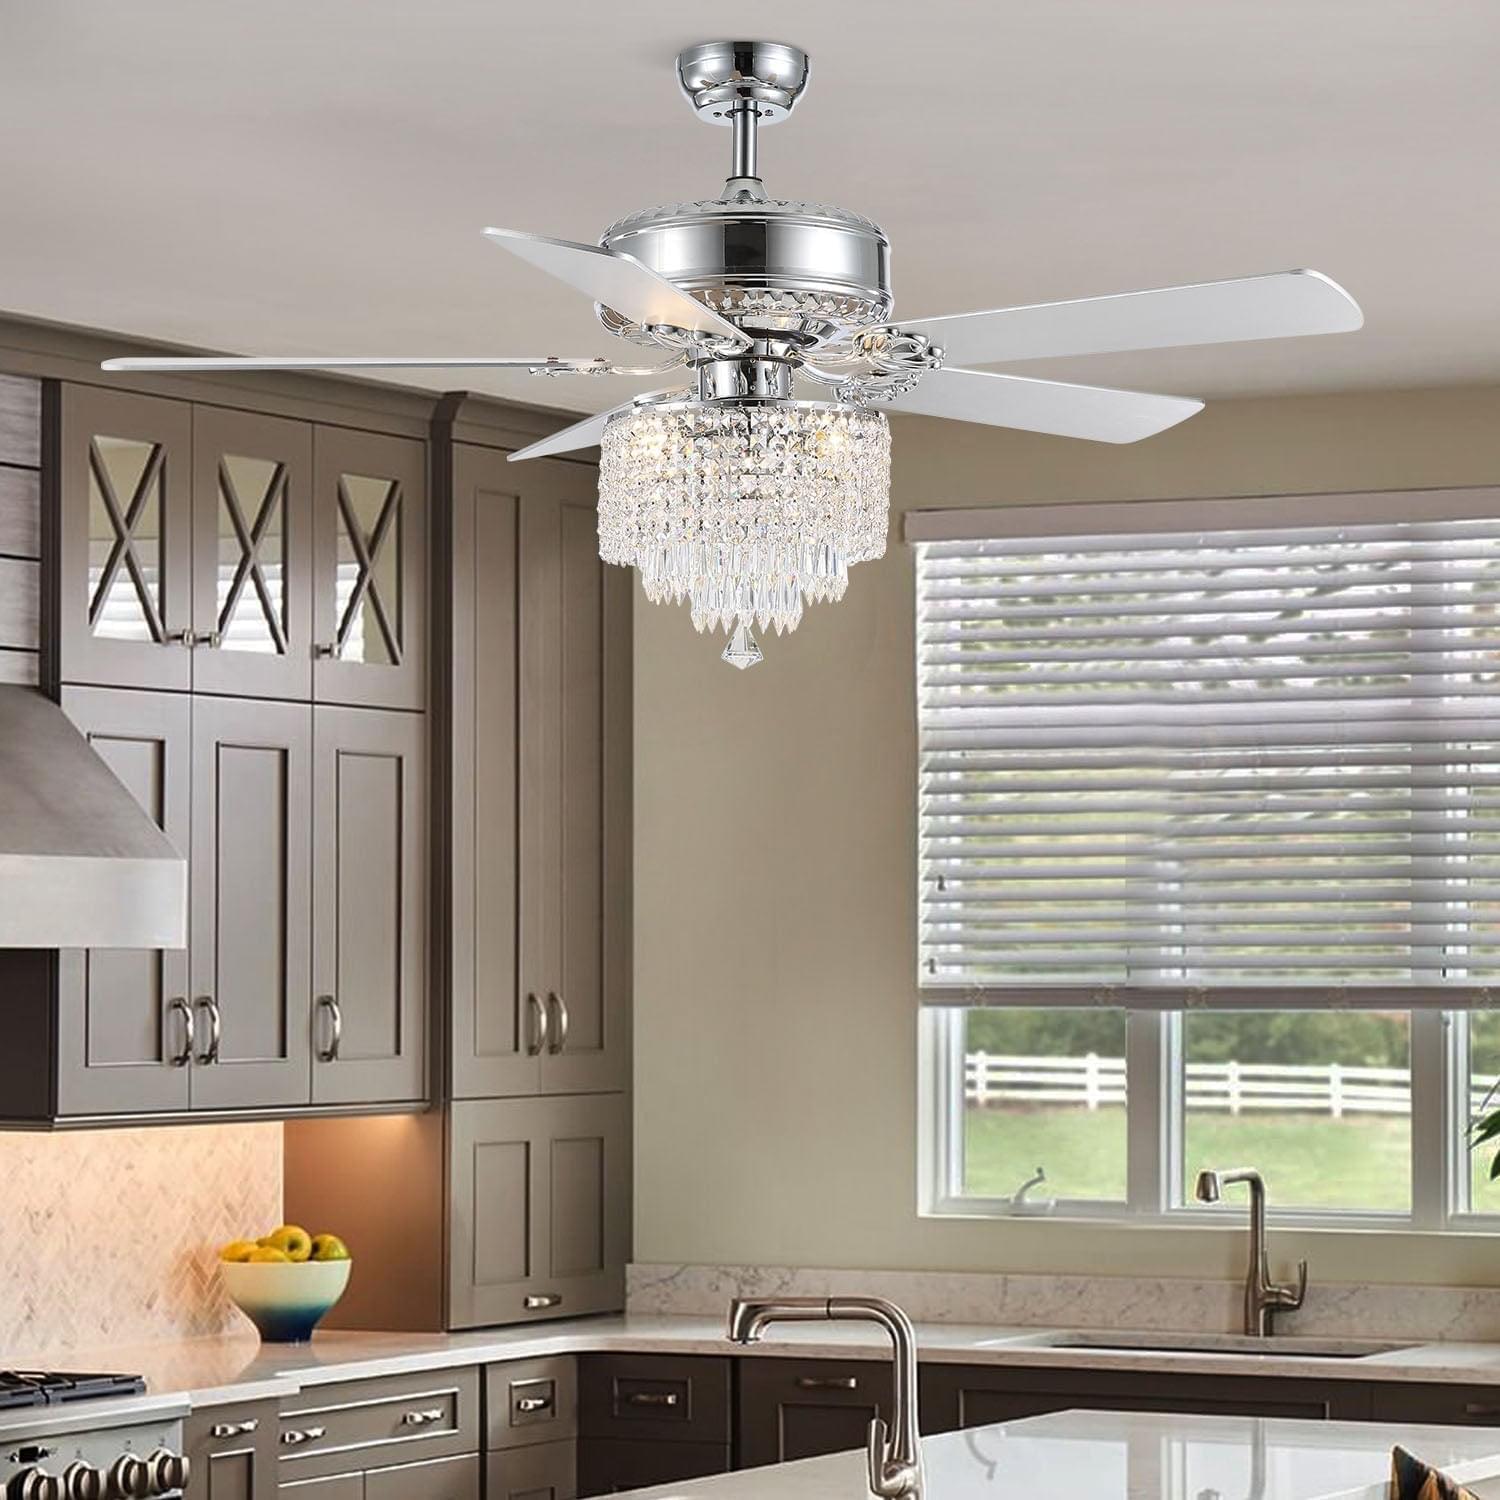 3 - Tier Raindrop Crystal Kitchen Ceiling Fan with Remote Control